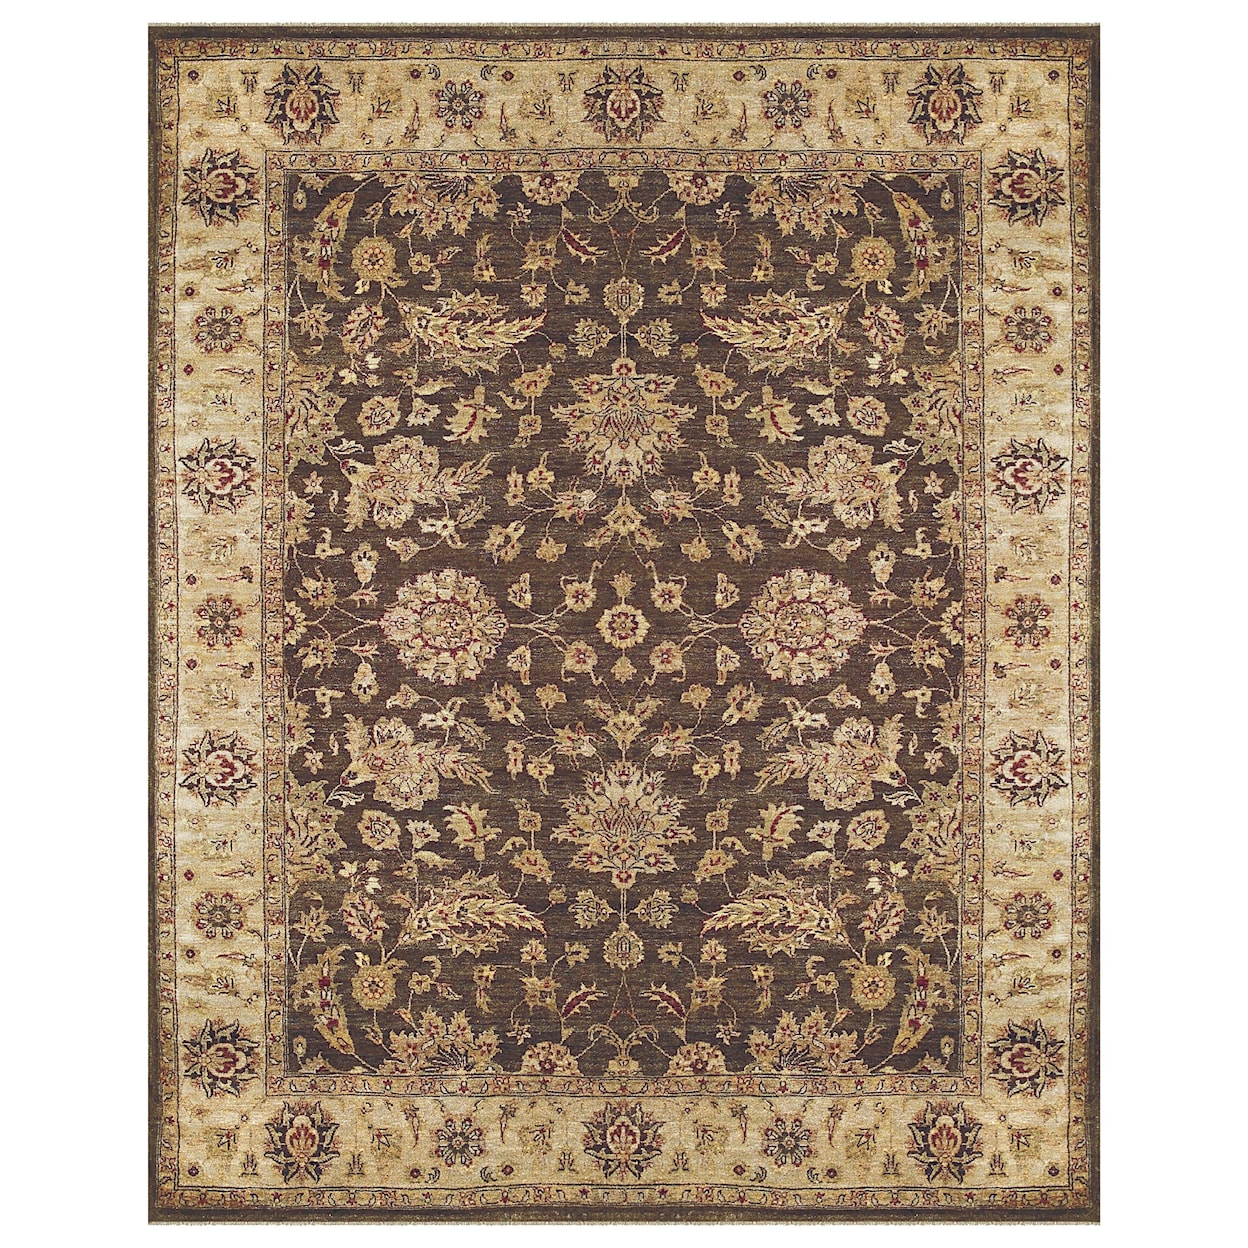 Feizy Rugs Drake Brown/Beige 8'-6" x 11'-6" Area Rug